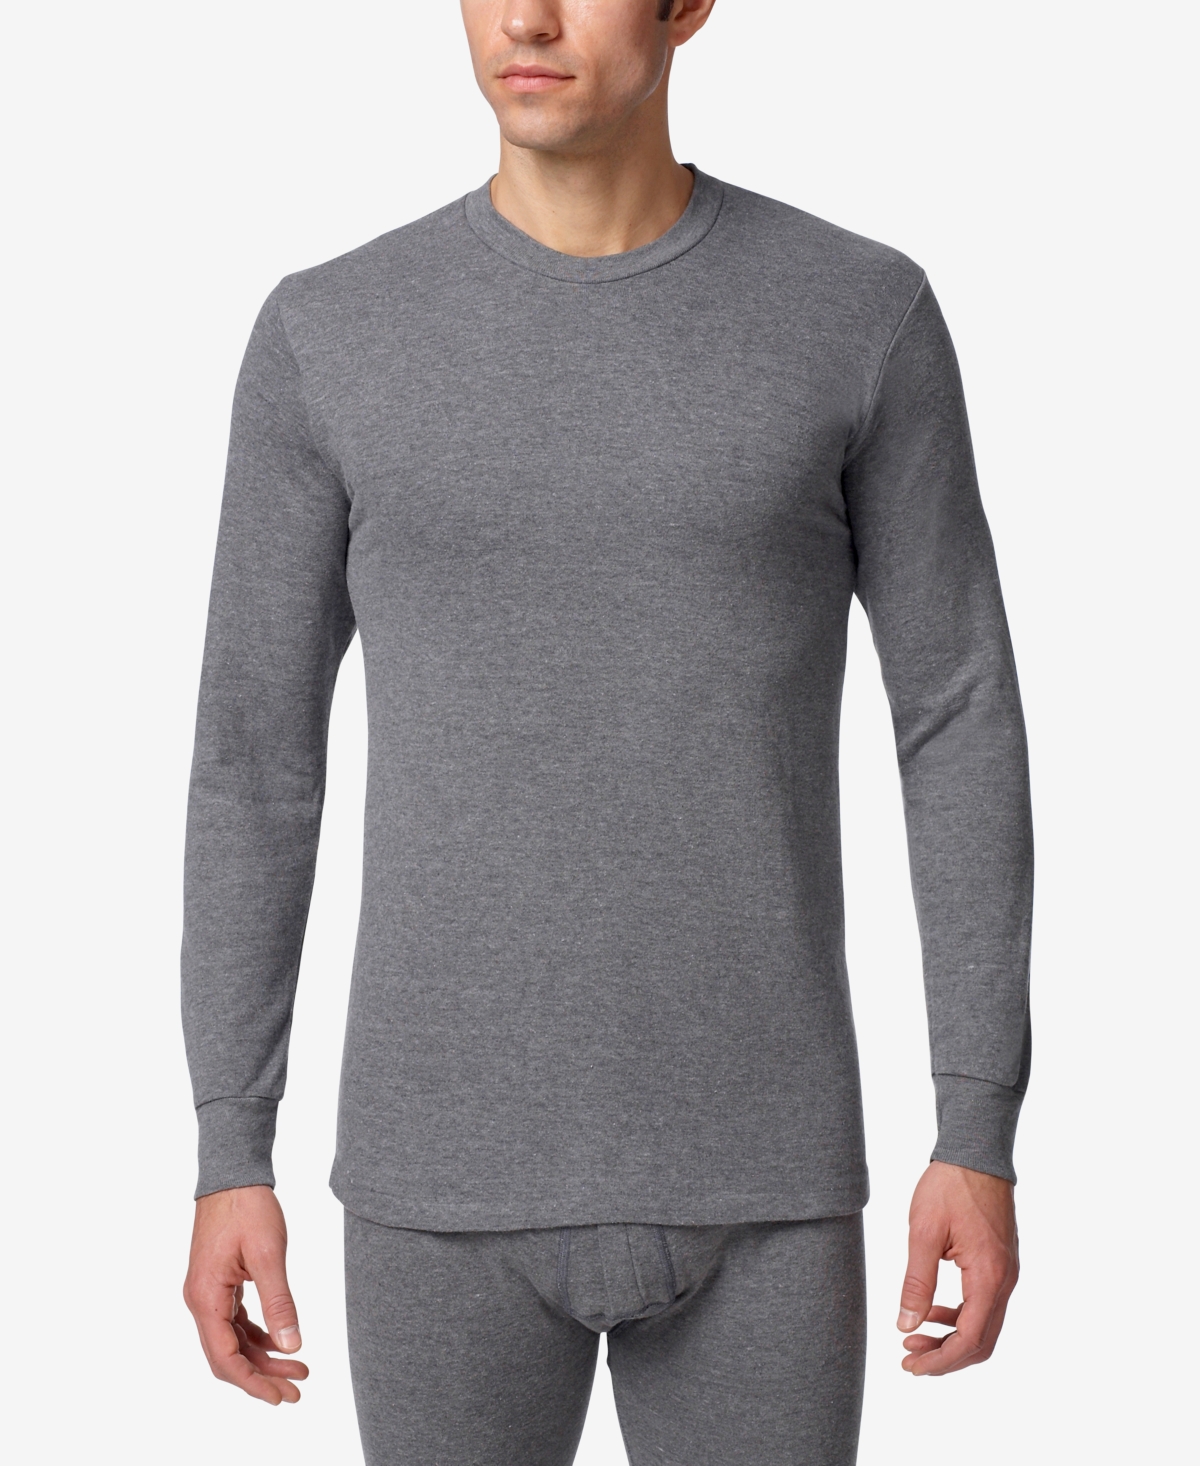 Men's Essentials Two Layer Long Sleeve Undershirt - Charcoal Mix